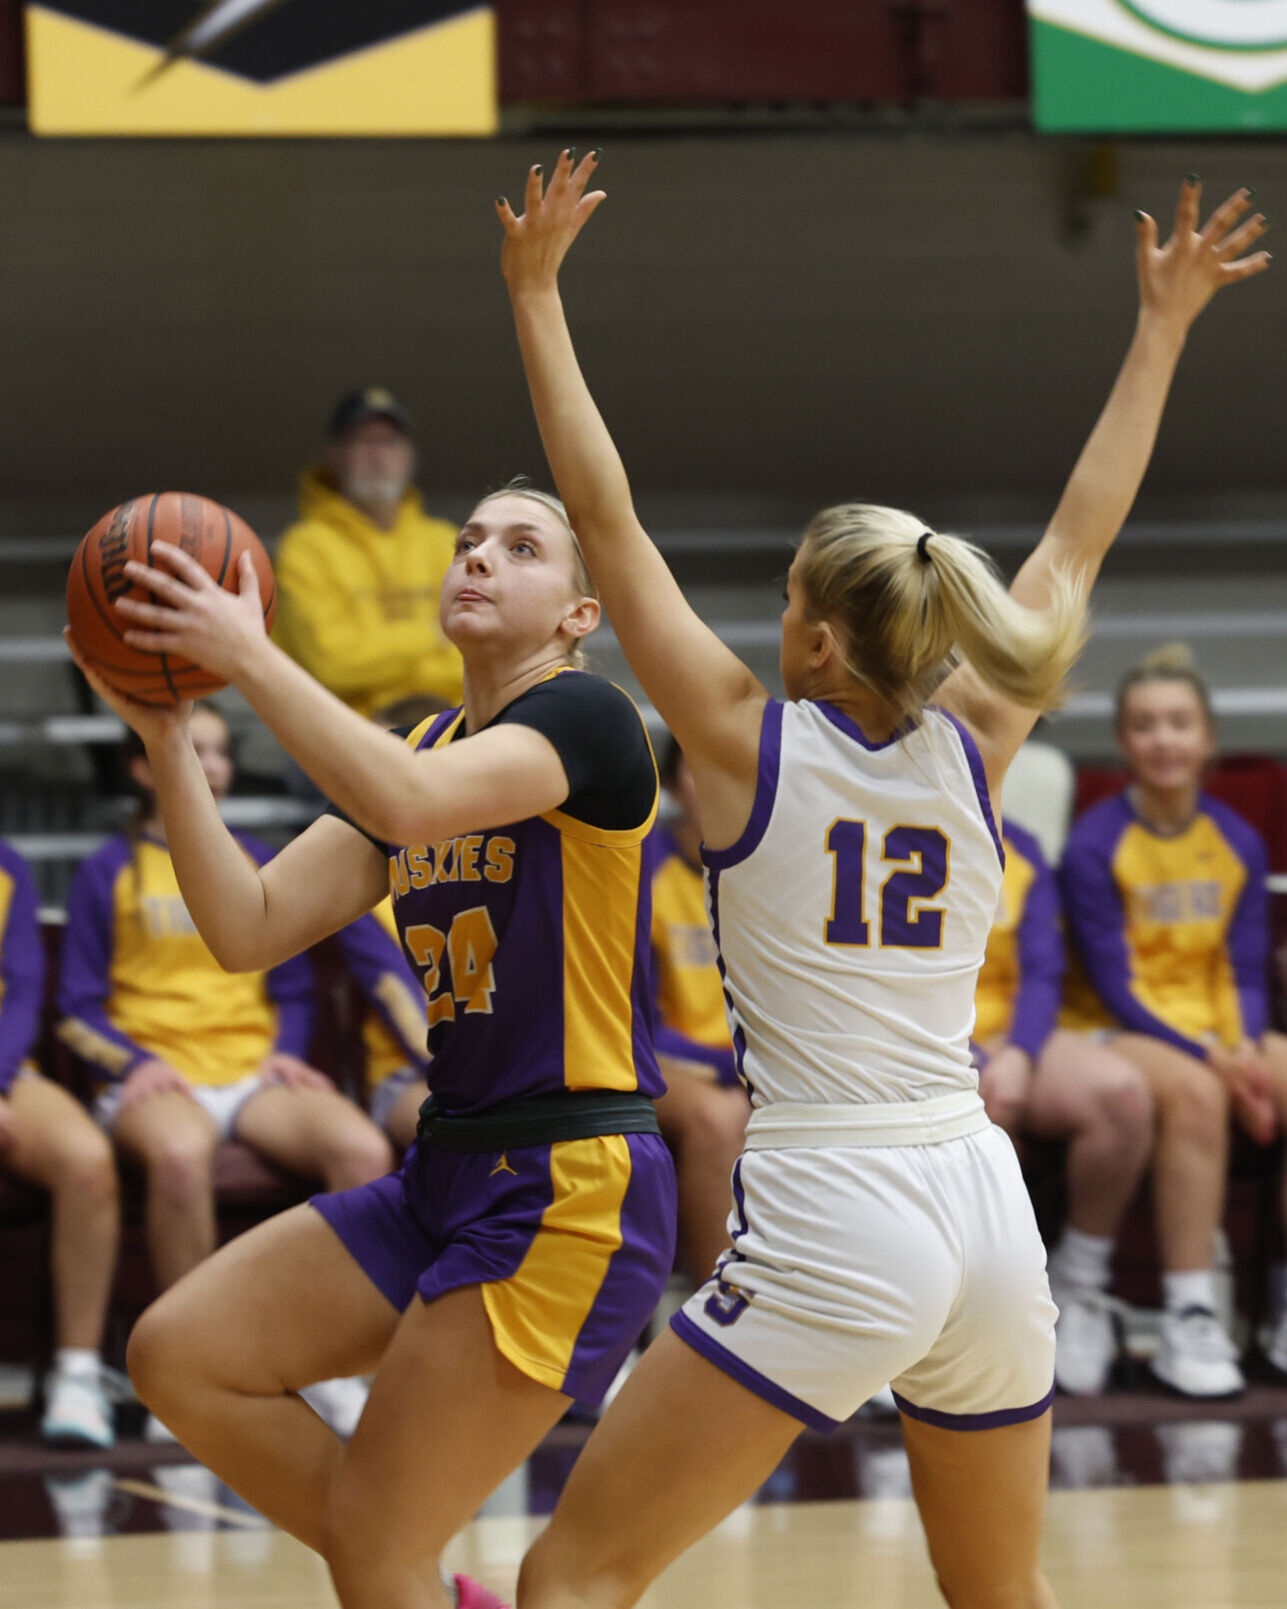 Annie Zillig’s 28 Points Propel Muscatine High to Victory over Sherrard Tigers